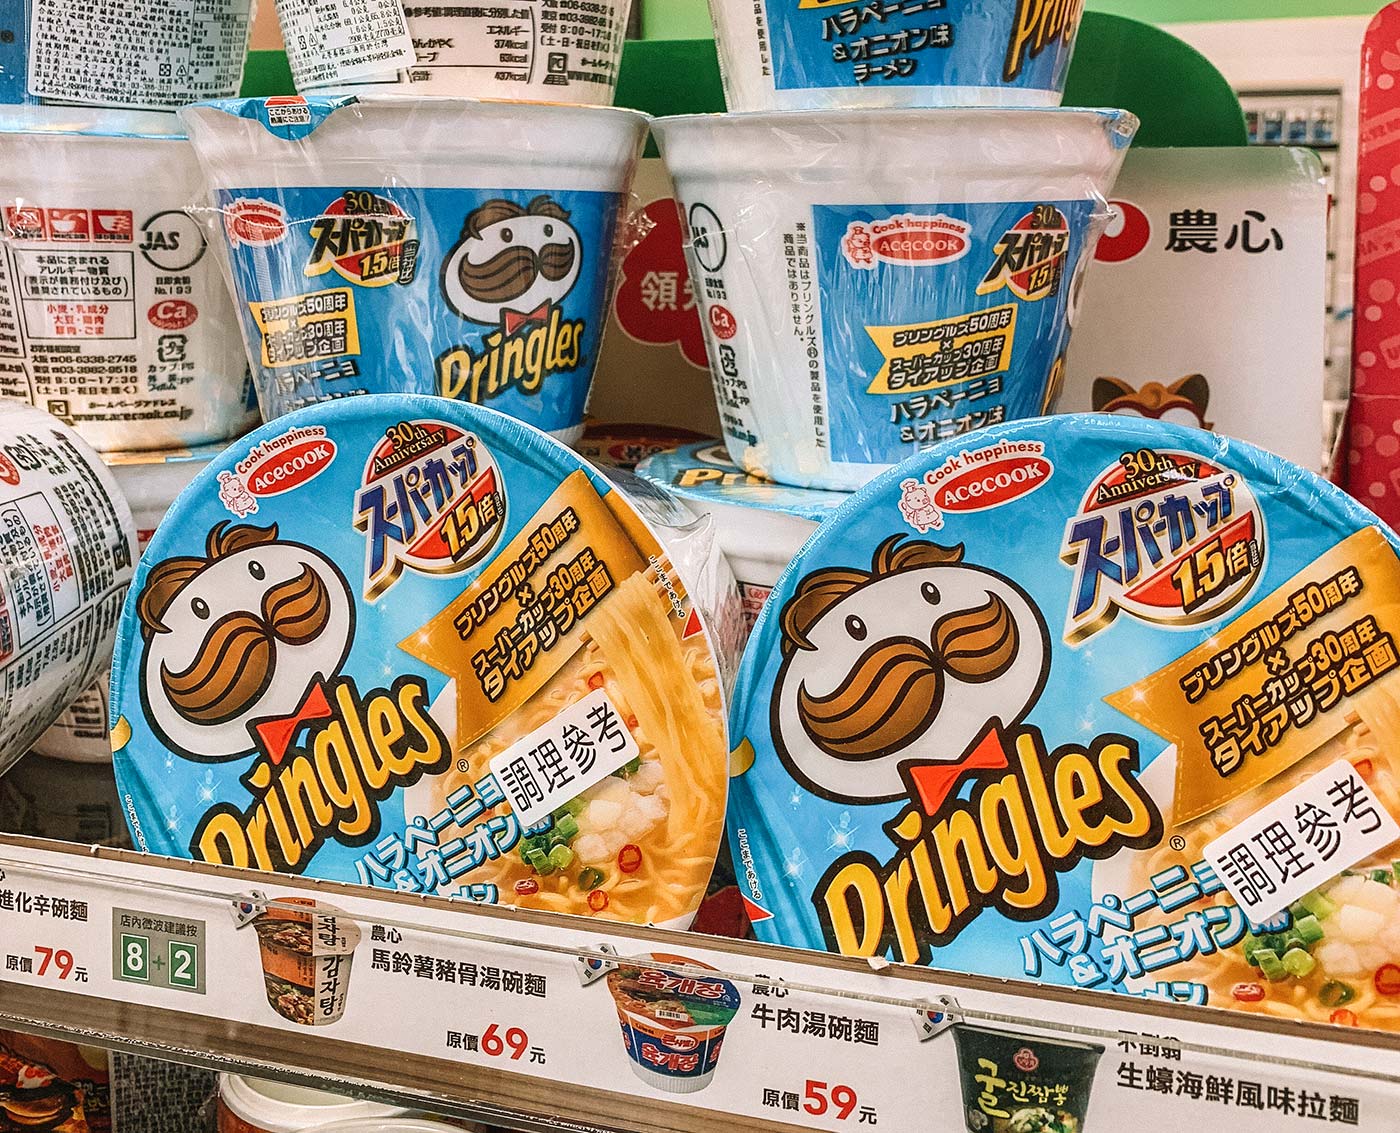 Taiwan 7-Eleven Pringles instant noodles